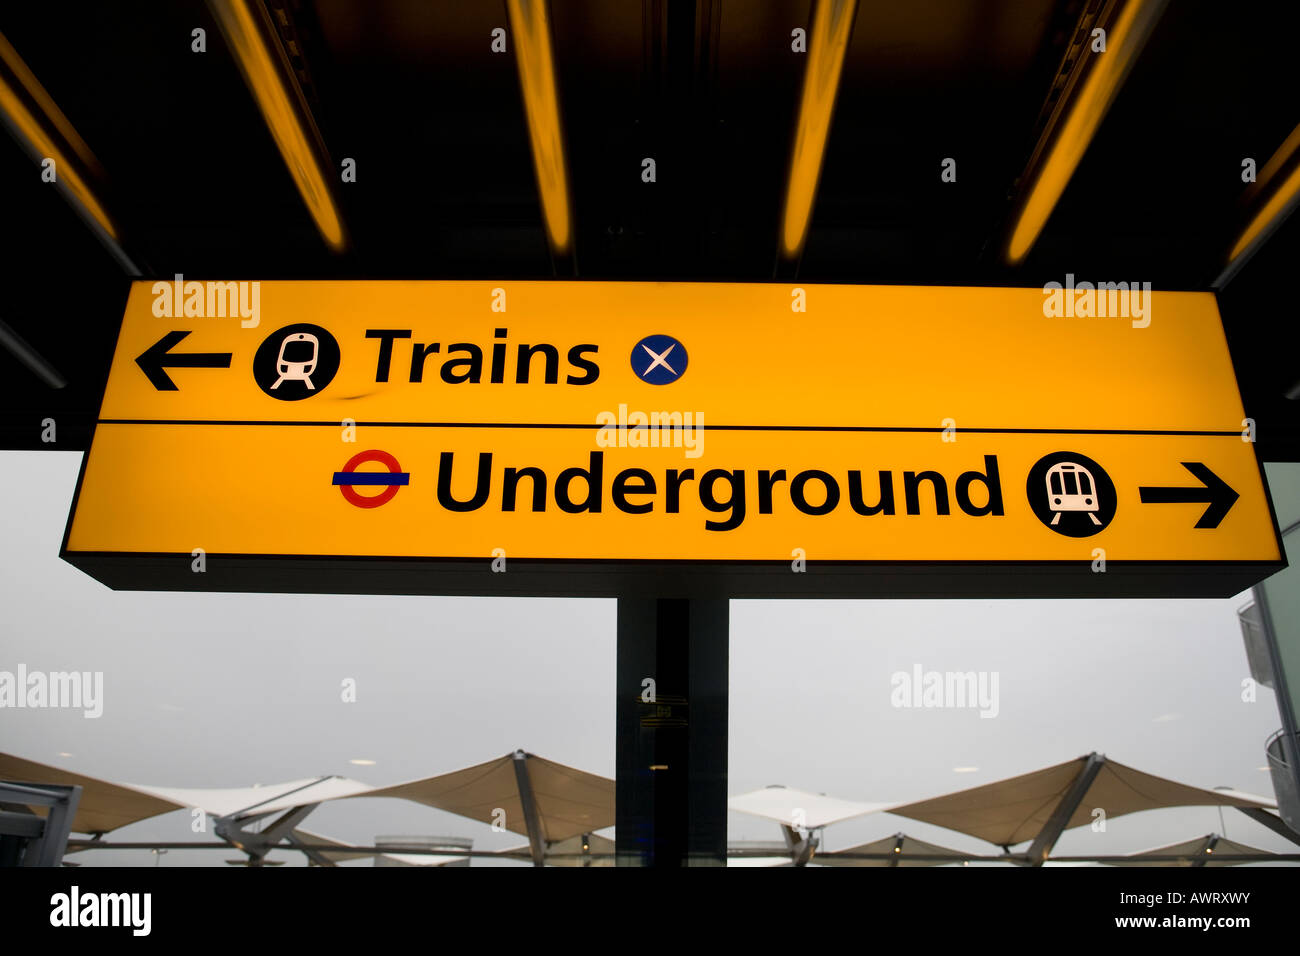 Information display showing direction to the Train and Underground stations at London Heathrow Airport terminal 5 Stock Photo